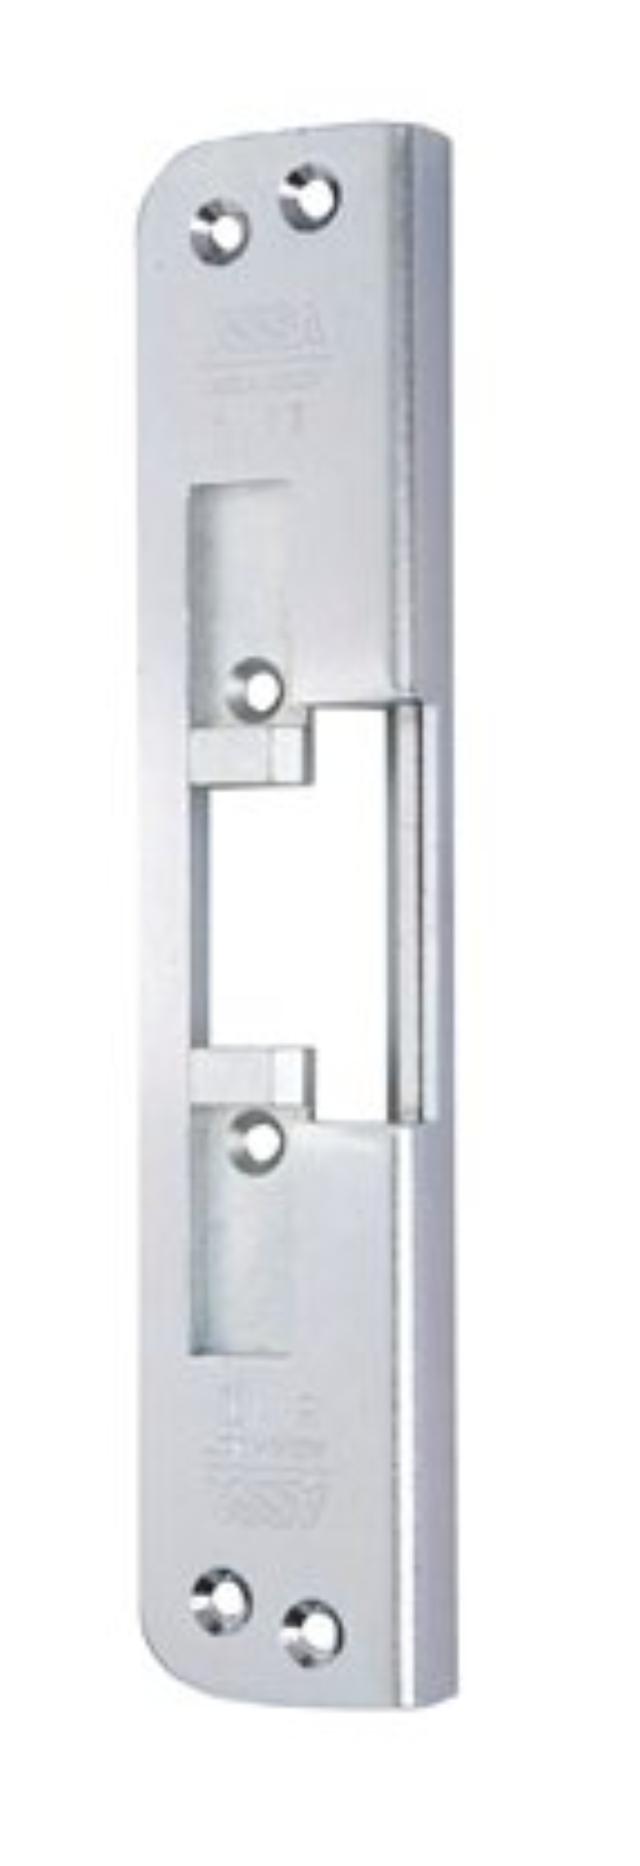 Solid post 511 t/electric end plate (971237)